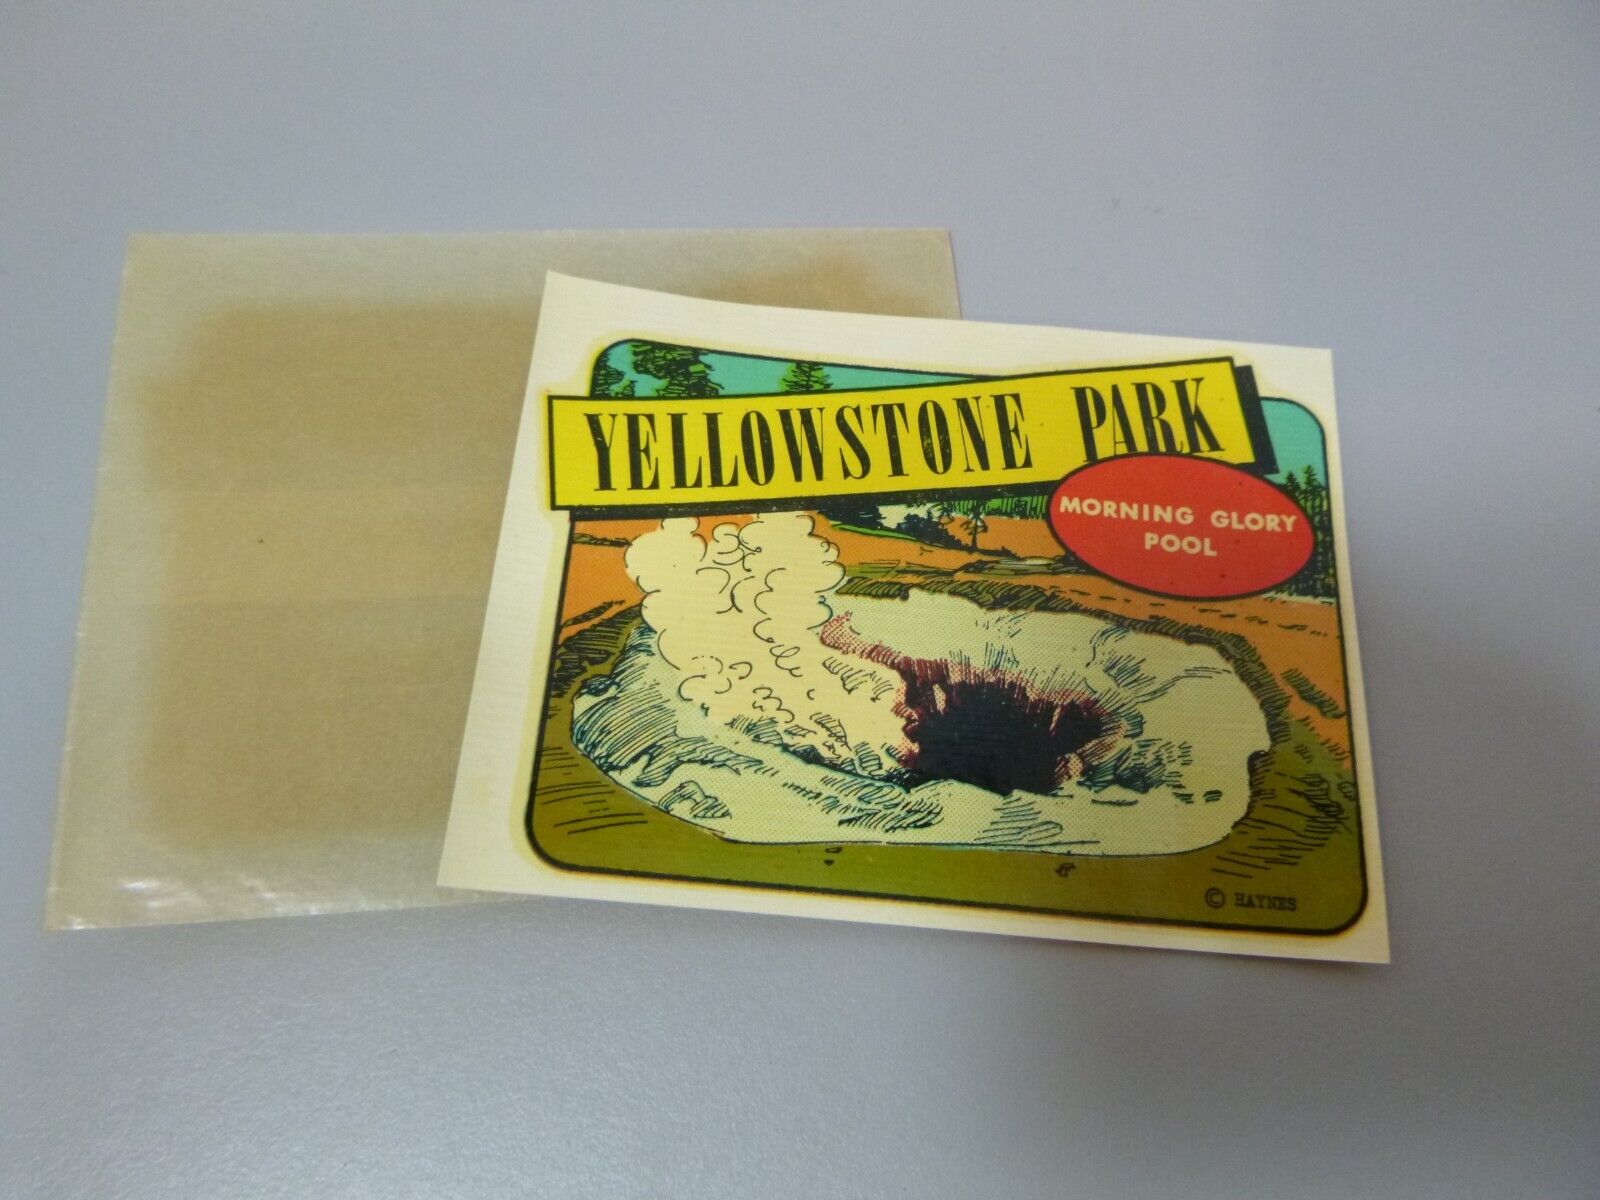 Vintage c1950s Automobile Decal Sticker - Yellowstone Park, Morning Glory Pool